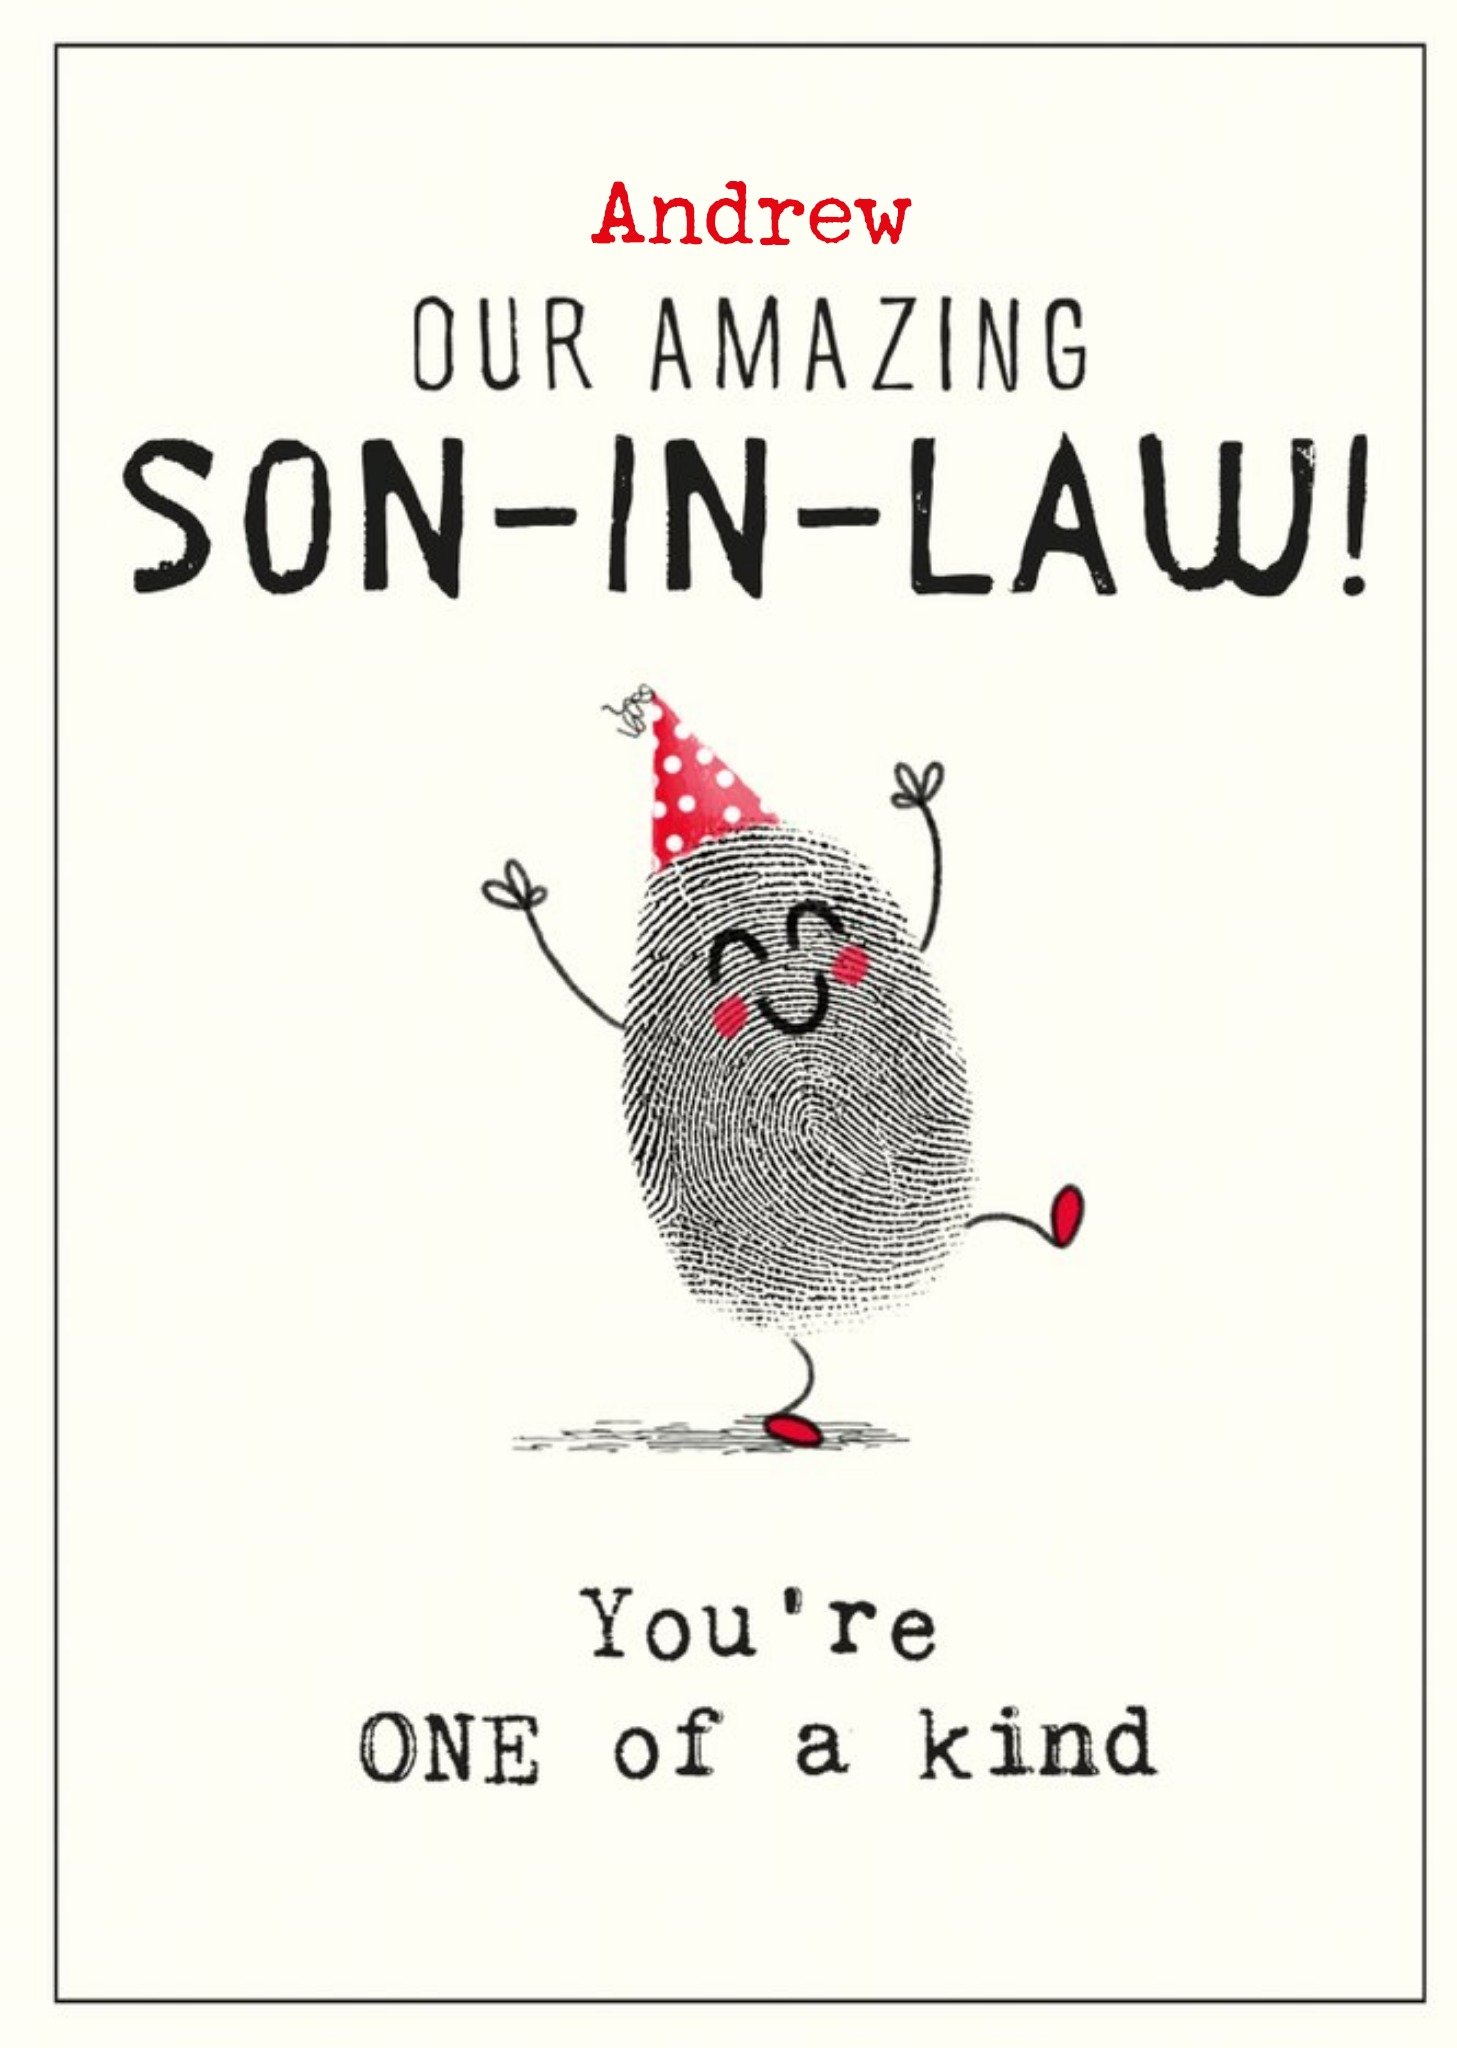 Moonpig Fun Illustration Of A Fingerprint Our Amazing Son In Law You're One Of A Kind Card, Large